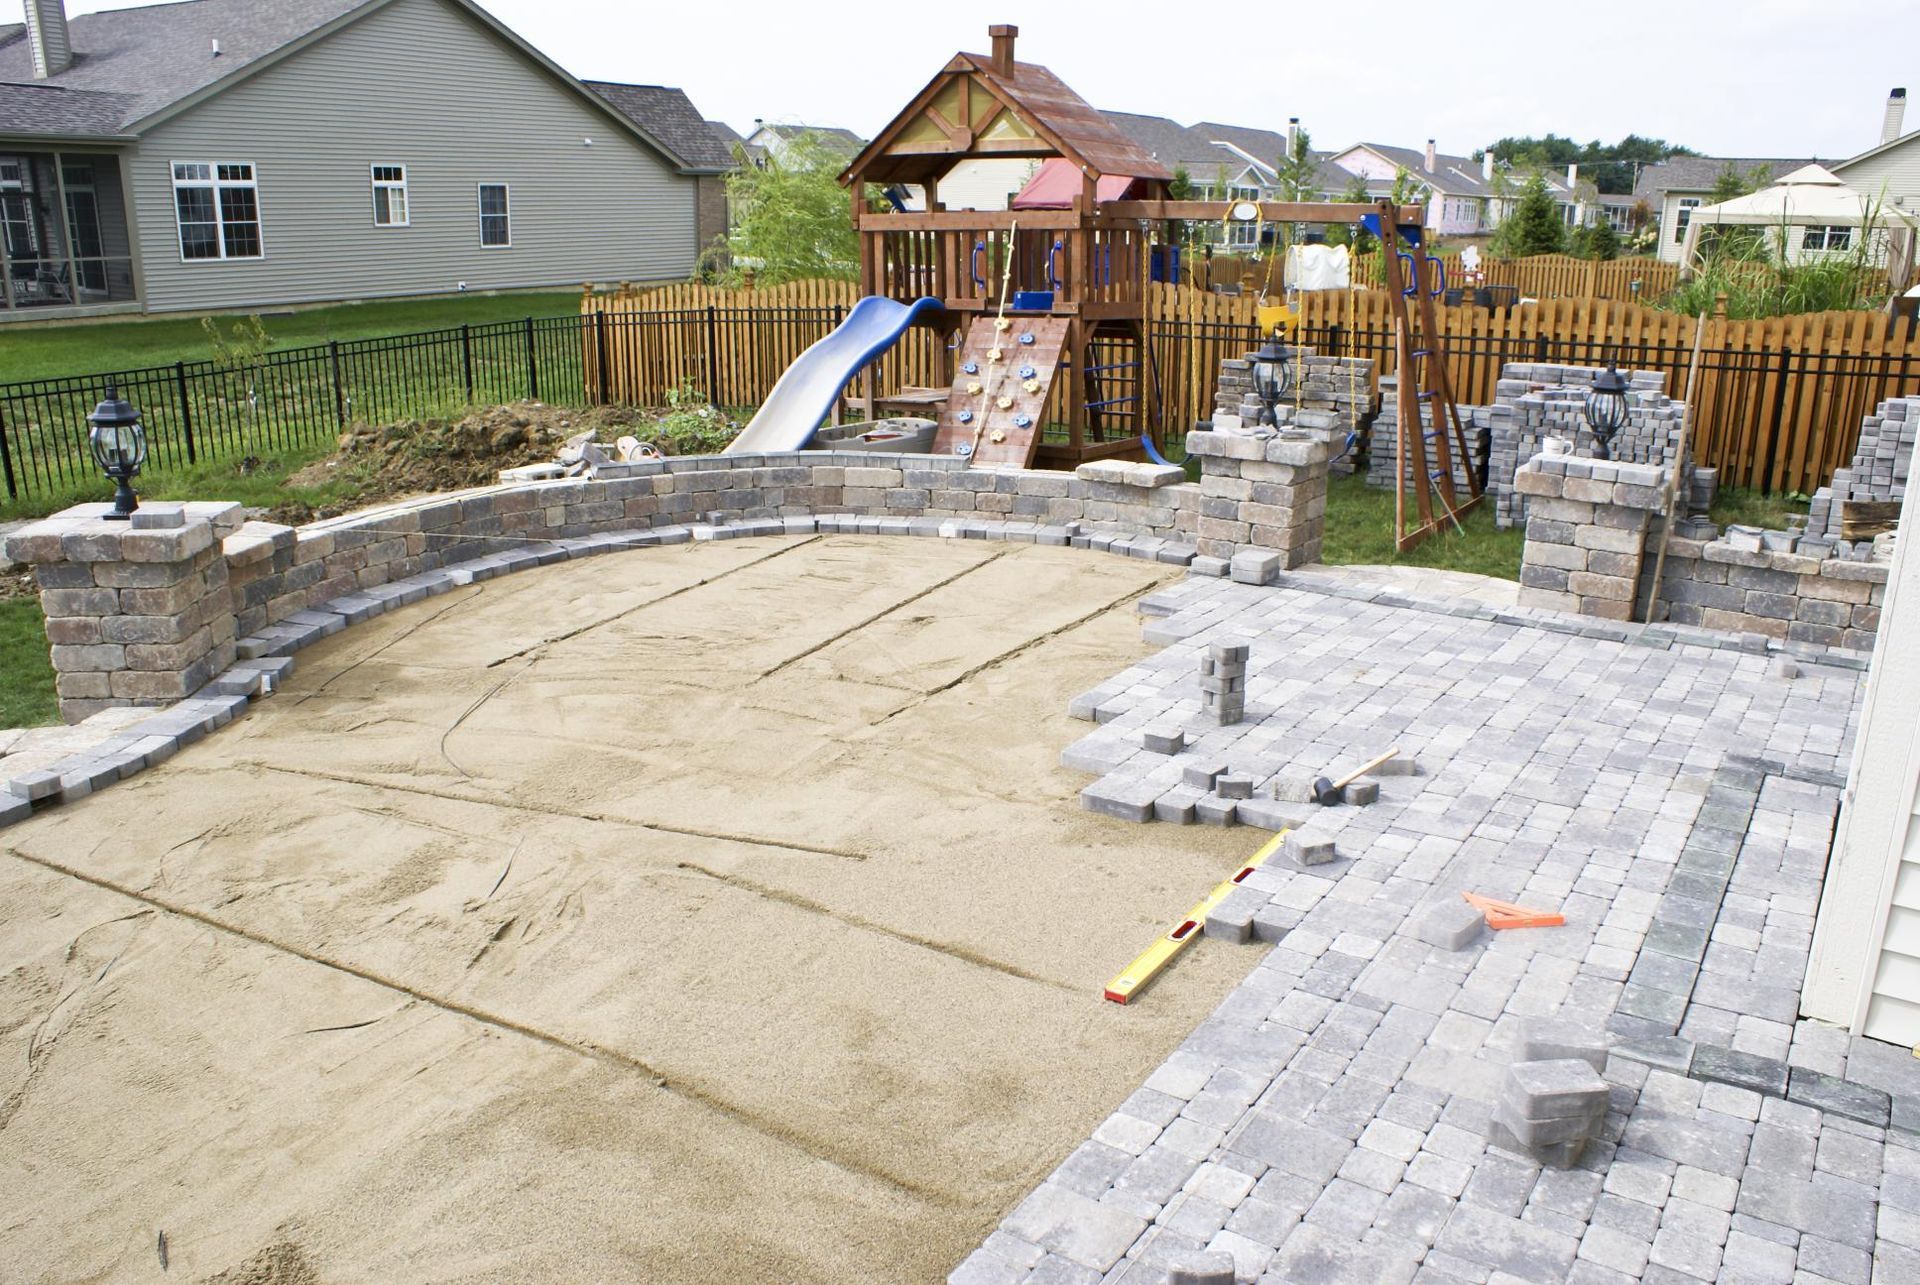 a playground is being built in the backyard of a house